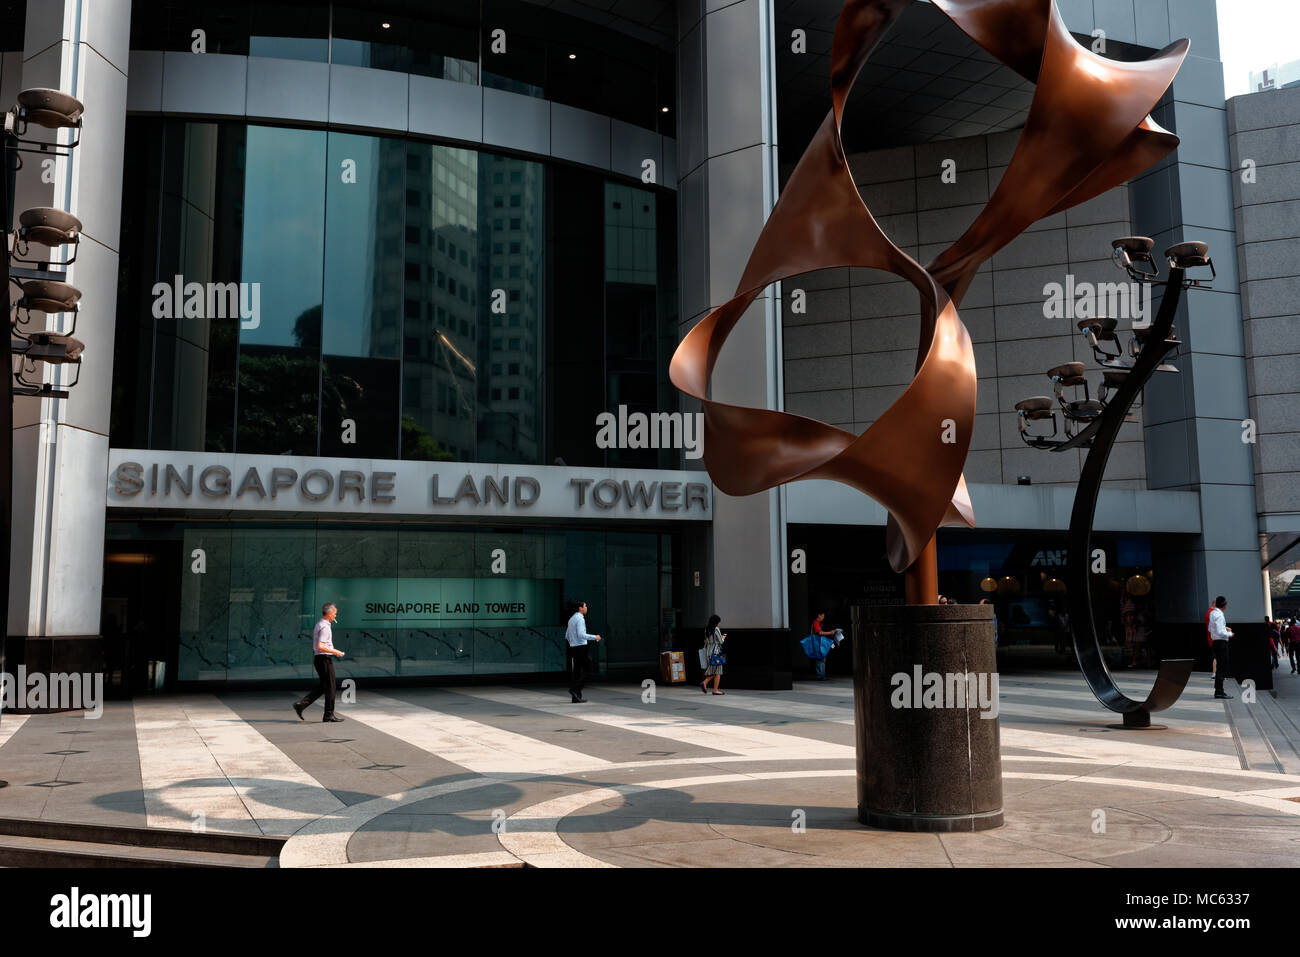 Sculpture outside the Singapore Land Tower, Raffles Place, Singapore Stock Photo